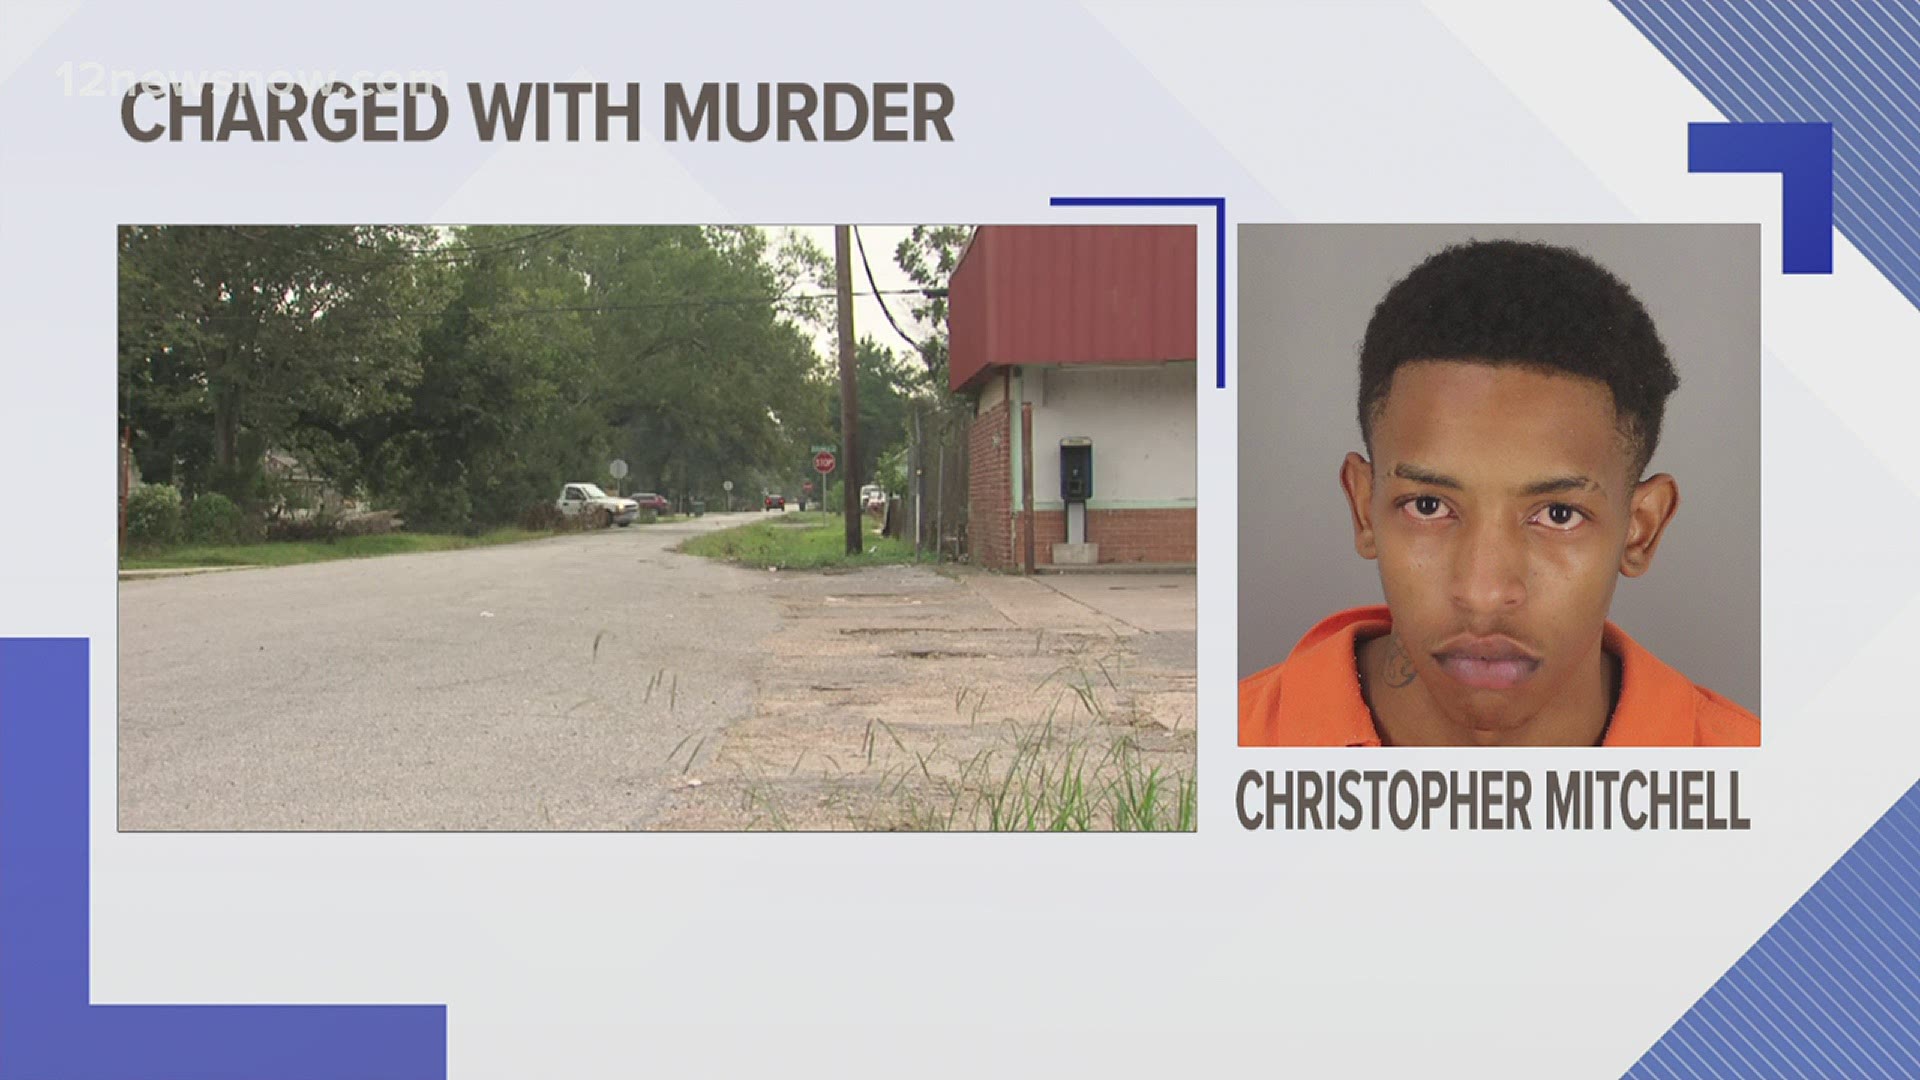 Court documents stated a witness told police Christopher Mitchell started shooting out of a car in a drive-by shooting in Beaumont and said, "I got me one."